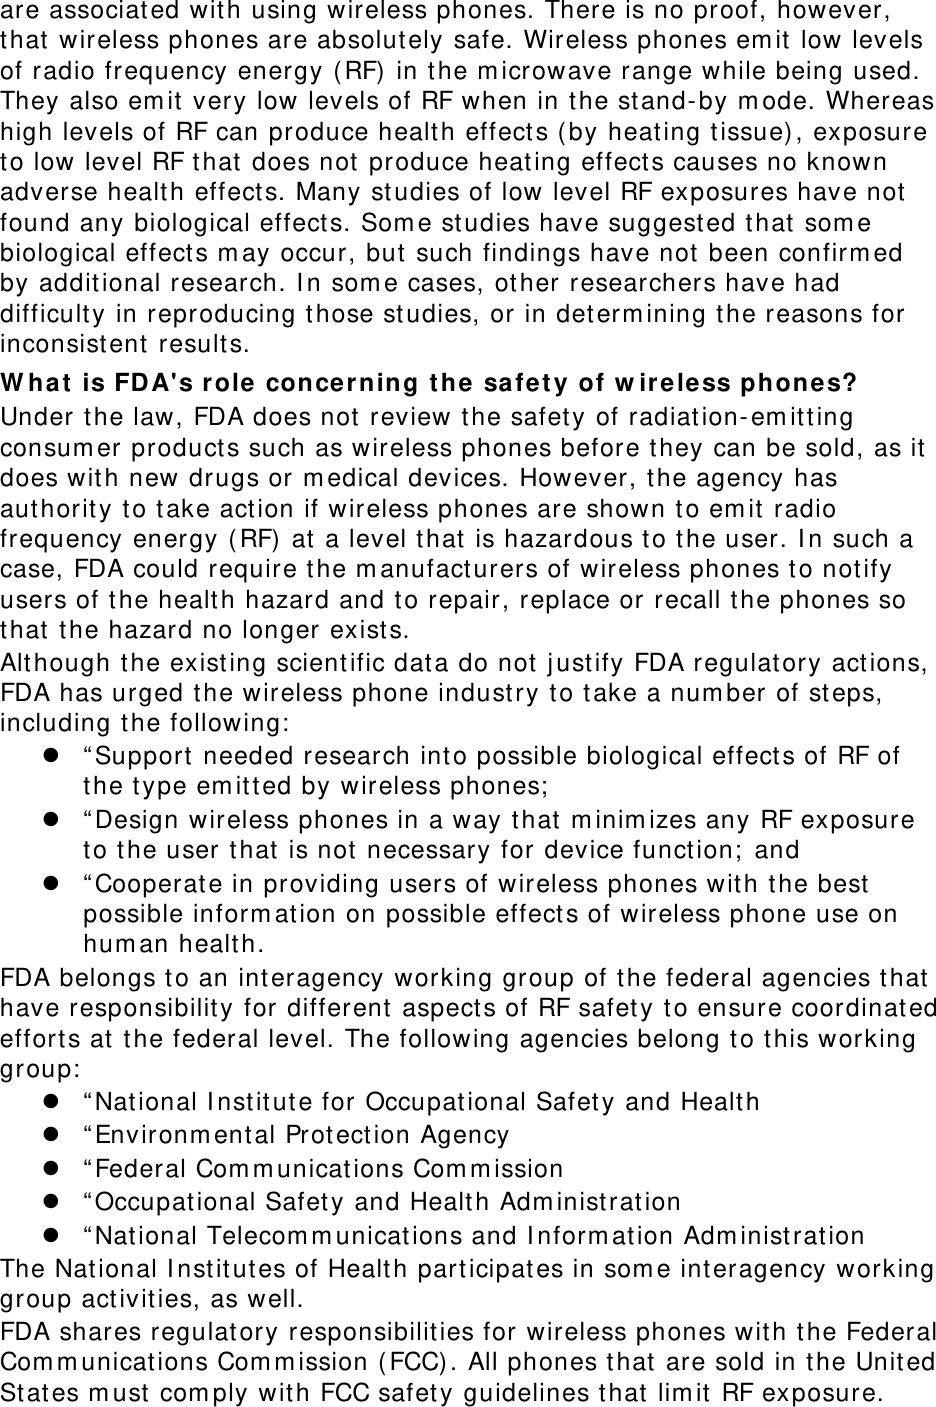 are associat ed wit h using wireless phones. There is no proof, however, that  wireless phones are absolut ely safe. Wireless phones em it  low levels of radio frequency energy ( RF)  in t he m icrowave range while being used. They also em it  very low levels of RF when in t he stand- by m ode. Whereas high levels of RF can produce healt h effect s (by heat ing t issue) , exposure to low level RF that  does not produce heat ing effect s causes no known adverse healt h effect s. Many st udies of low level RF exposures have not  found any biological effect s. Som e studies have suggested t hat  som e biological effect s m ay occur, but such findings have not  been confirm ed by addit ional research. I n som e cases, other researchers have had difficult y in reproducing t hose st udies, or in det erm ining t he reasons for inconsist ent  results. W hat is FD A&apos;s role concerning t he sa fety of w irele ss phones? Under the law, FDA does not  review the safety of radiat ion- em itt ing consum er product s such as wireless phones before t hey can be sold, as it does wit h new drugs or m edical devices. However, t he agency has aut horit y to take act ion if wireless phones are shown t o em it  radio frequency energy ( RF)  at  a level t hat  is hazardous t o t he user. I n such a case, FDA could require the m anufacturers of wireless phones t o not ify users of t he healt h hazard and t o repair, replace or recall the phones so that  the hazard no longer exists. Although t he exist ing scientific dat a do not  just ify FDA regulat ory act ions, FDA has urged t he wireless phone indust ry t o t ake a num ber of steps, including t he following:   “ Support needed research int o possible biological effects of RF of the t ype em itt ed by wireless phones;   “ Design wireless phones in a way t hat  m inim izes any RF exposure to t he user that  is not  necessary for device funct ion;  and  “ Cooperate in providing users of wireless phones wit h t he best  possible inform at ion on possible effect s of wireless phone use on hum an healt h. FDA belongs t o an int eragency working group of t he federal agencies t hat have responsibilit y for different aspect s of RF safet y to ensure coordinat ed efforts at  the federal level. The following agencies belong t o t his working group:   “ Nat ional I nst itut e for Occupat ional Safety and Healt h  “ Environm ental Prot ect ion Agency  “ Federal Com m unications Com m ission  “ Occupat ional Safety and Health Adm inist rat ion  “ Nat ional Telecom m unicat ions and I nform at ion Adm inistrat ion The Nat ional I nst it ut es of Health participat es in som e interagency working group act ivit ies, as well. FDA shares regulat ory responsibilit ies for wireless phones wit h t he Federal Com m unications Com m ission ( FCC) . All phones that are sold in the Unit ed St at es m ust  com ply with FCC safety guidelines t hat  lim it  RF exposure. 